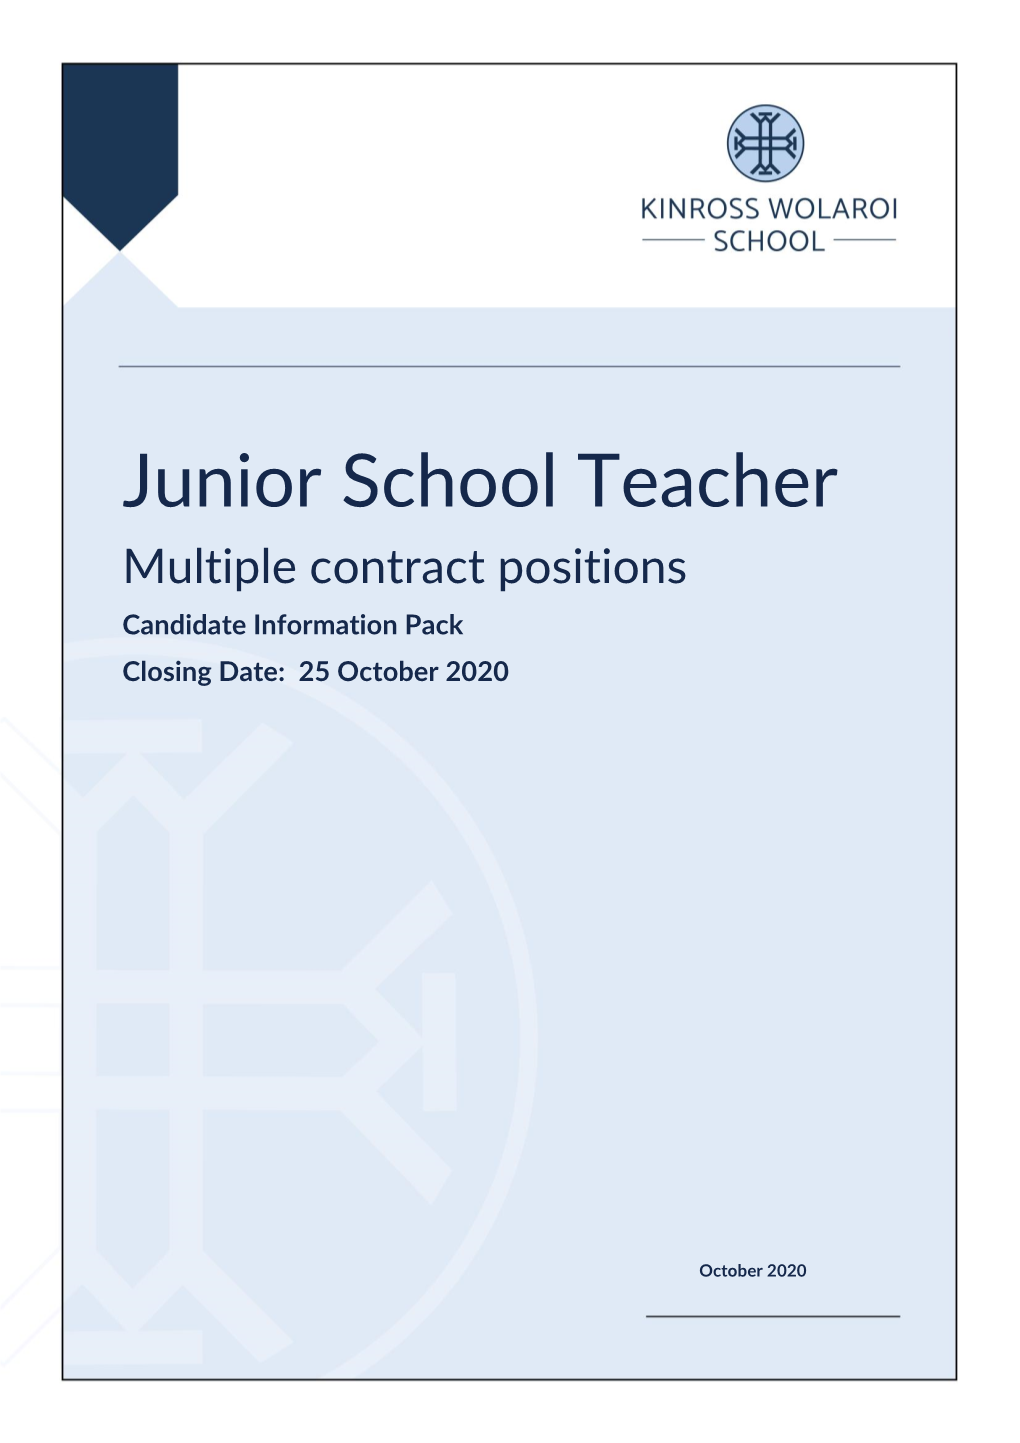 Junior School Teacher Multiple Contract Positions Candidate Information Pack Closing Date: 25 October 2020